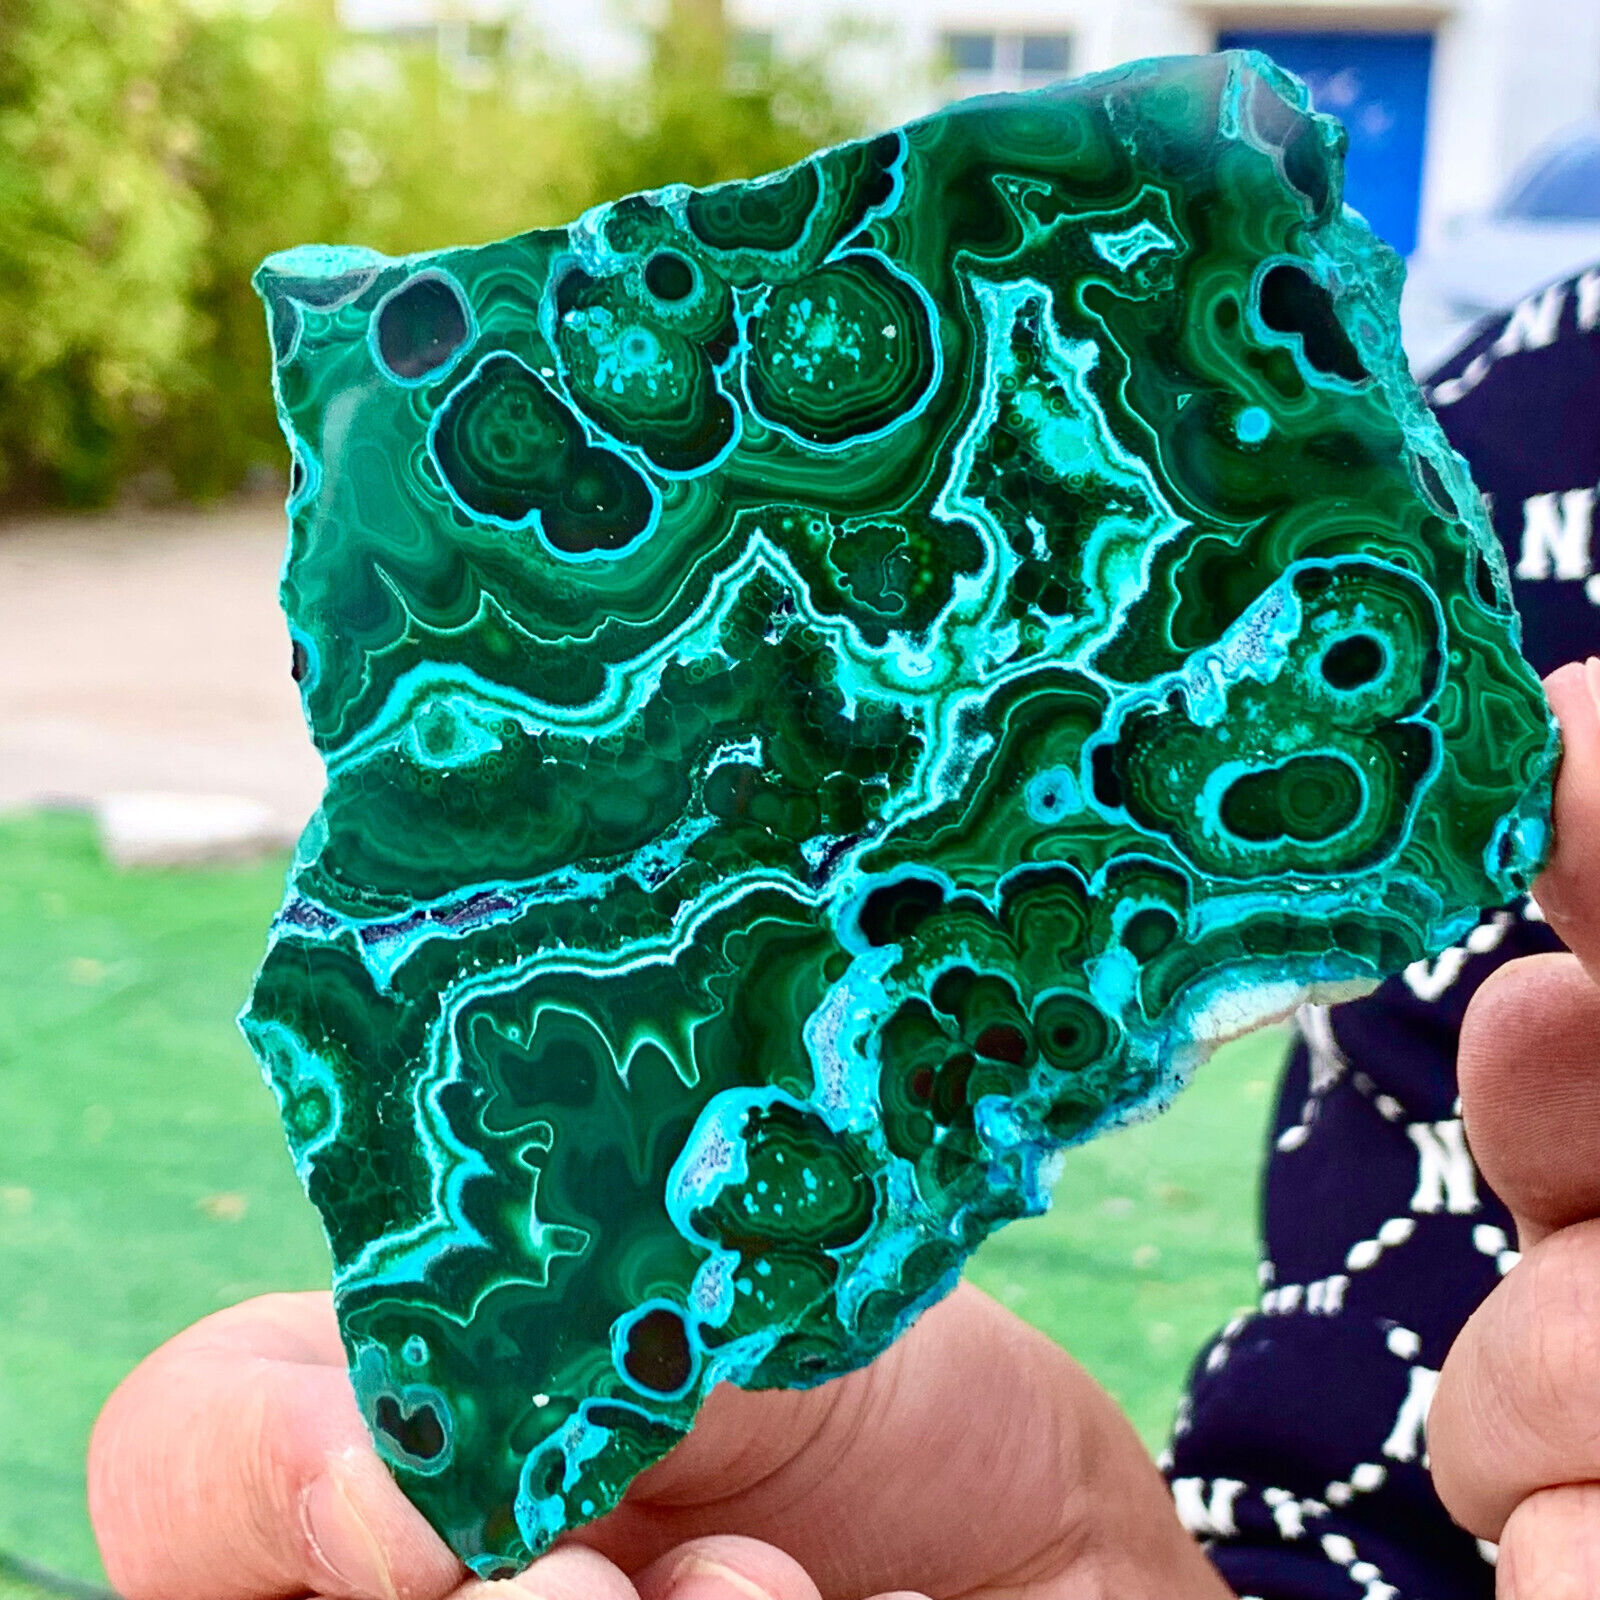 228G Natural chrysocolla/Malachite transparent cluster rough mineral sample